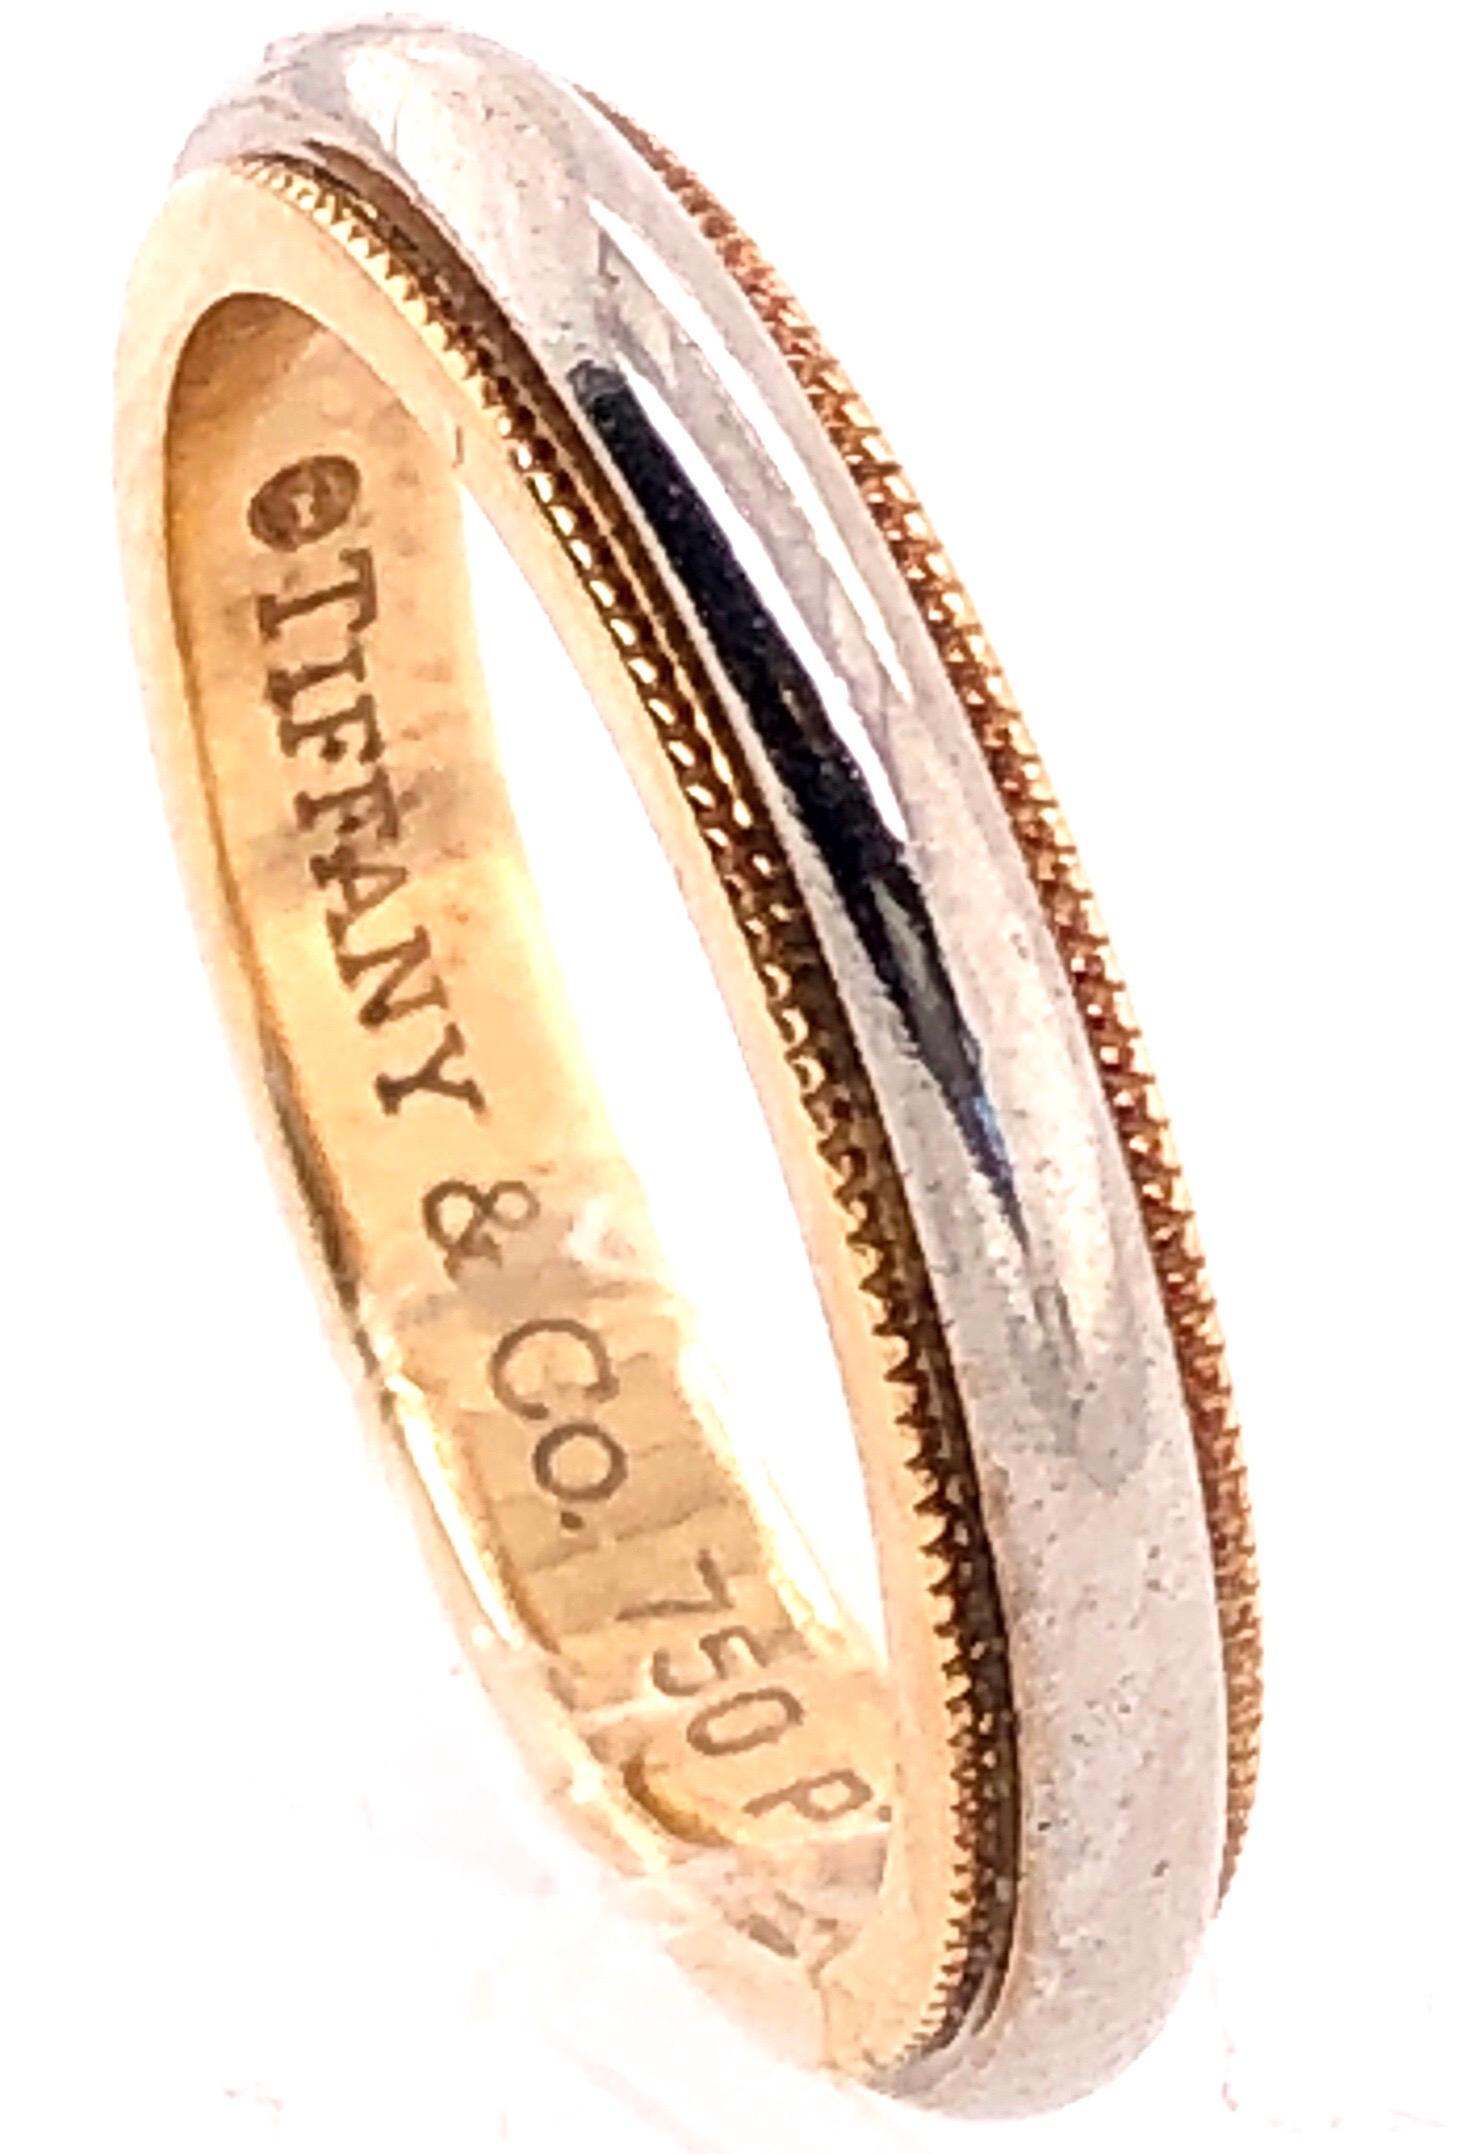 Platinum Gold Tiffany & Co. Band/Wedding Ring.
Size 5.5. 3.35MM Wide 
5.46 grams total weight.  